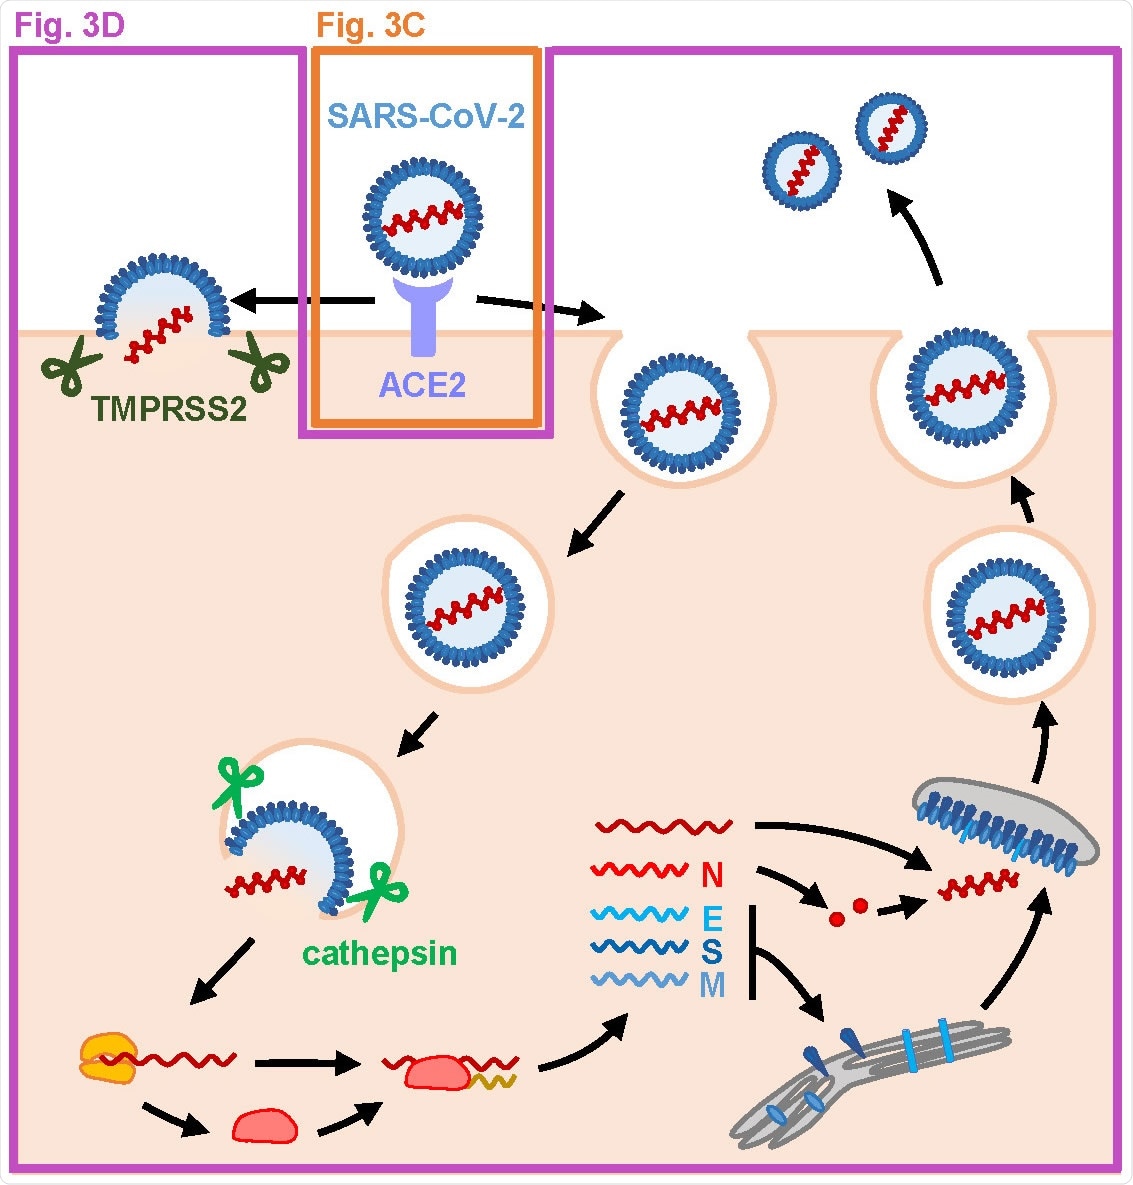 MFQ inhibits the SARS-CoV-2 entry process. (A) SARS-CoV-2 life cycle. SARS-CoV-2 infection is initiated with virus attachment to the host cells that involves the cellular receptor, angiotensin converting enzyme 2 (ACE2), followed by the cleavage of viral Spike (S) proteins by either transmembrane serine protease (TMPRSS2) on the plasma membrane or cathepsins in the endosome/lysosome that induces fusion of viral and host membranes. Viral RNA is translated, processed and replicated to be assembled into progeny virus with viral structural proteins and released extracellularly.